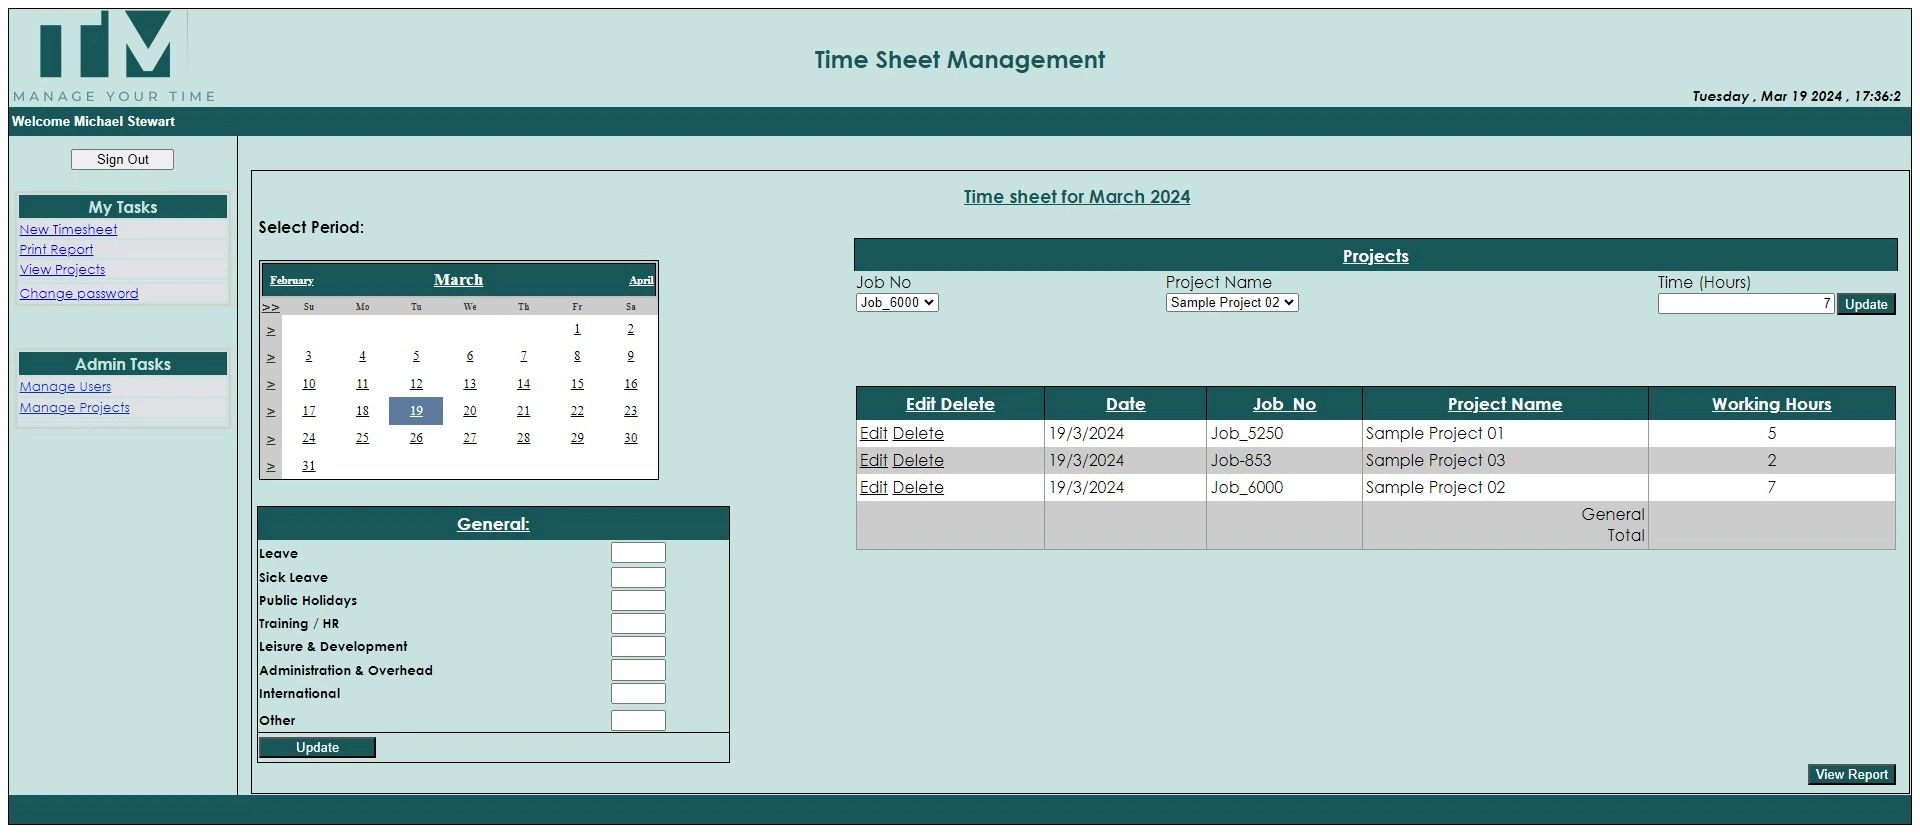 Time sheet Management - Main Page